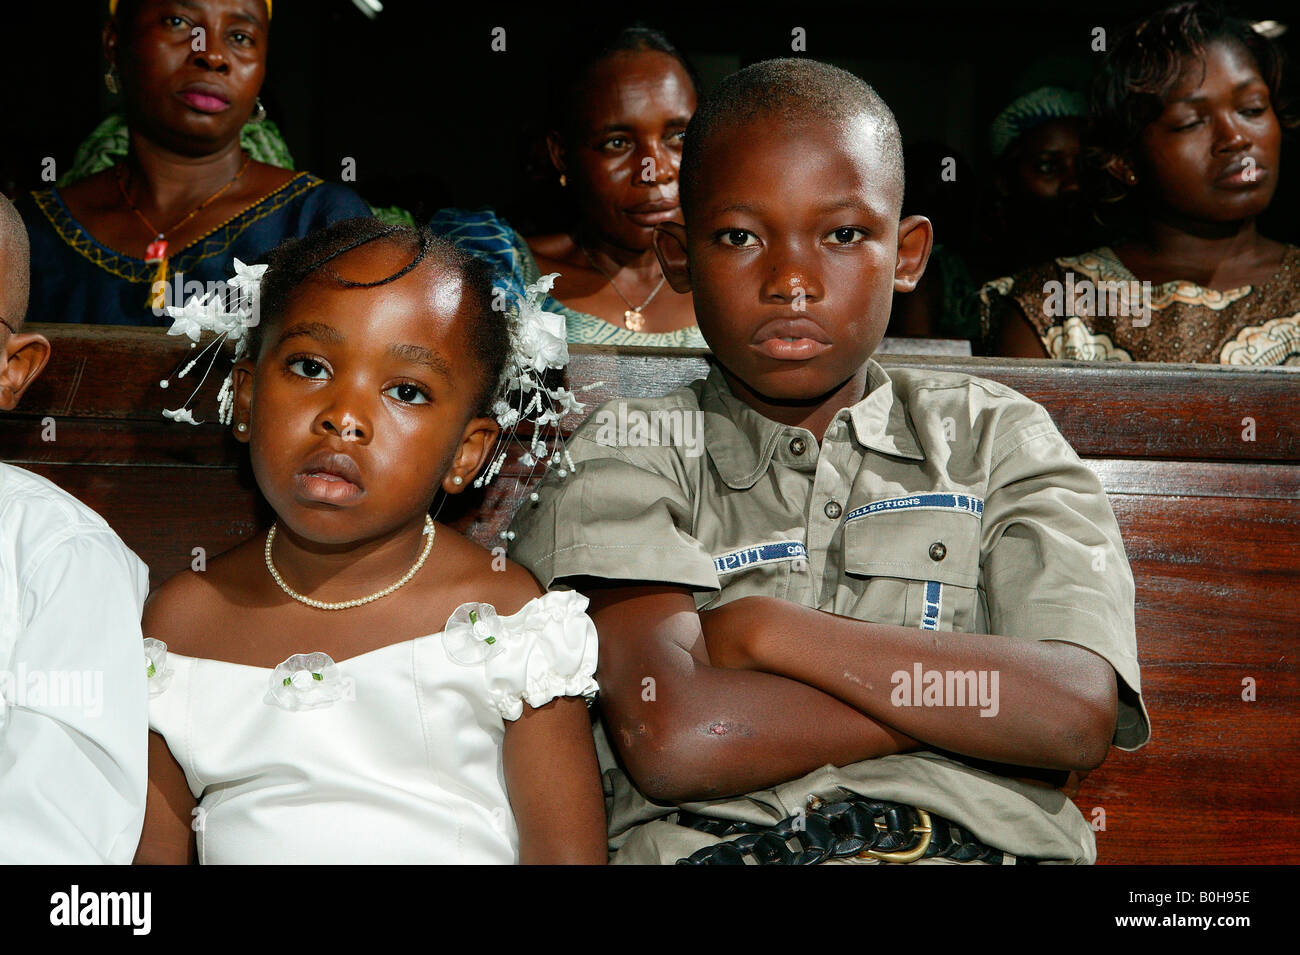 Boy and girl sitting on a church pew, Douala, Cameroon, Africa Stock Photo